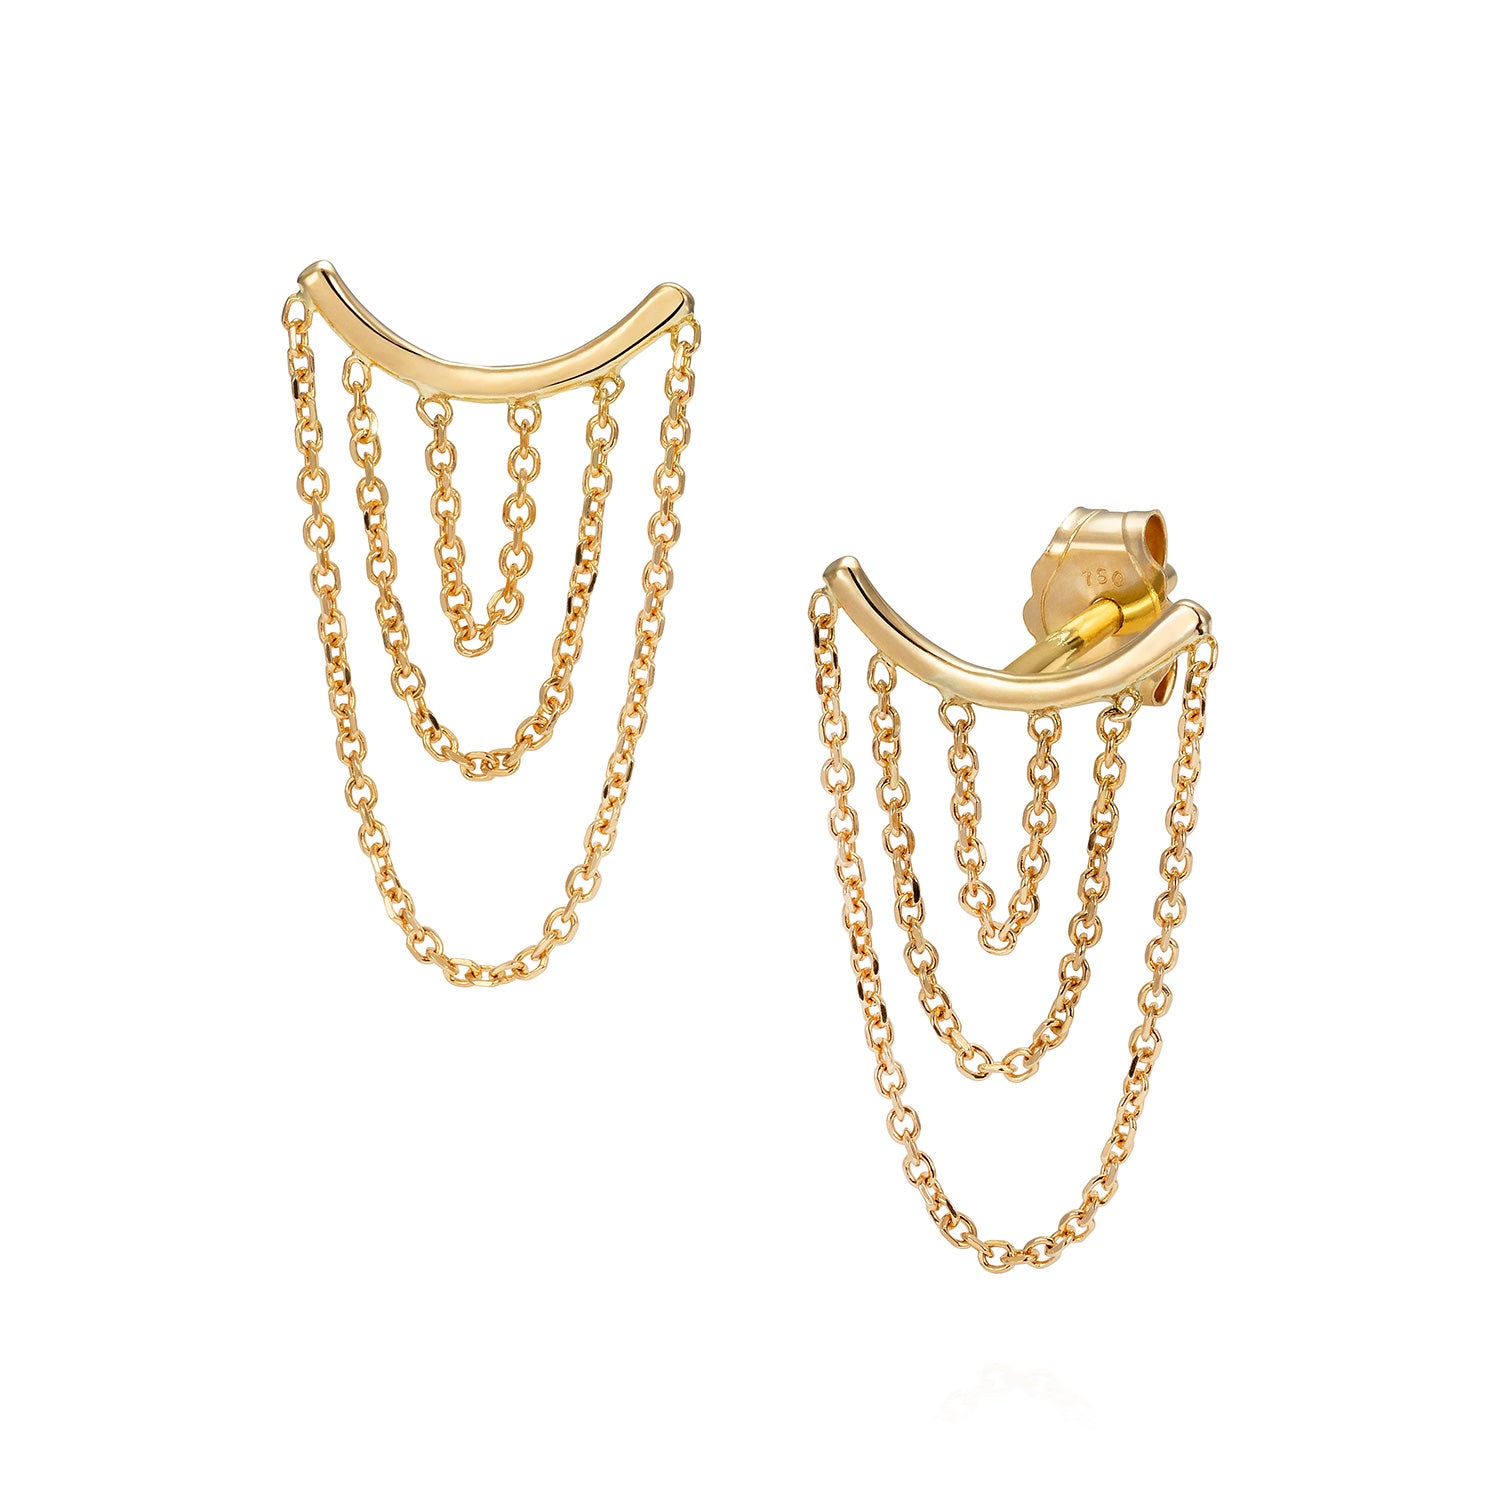 Sweet Pea 18ct yellow gold Nouveau Now chain stud earrings.